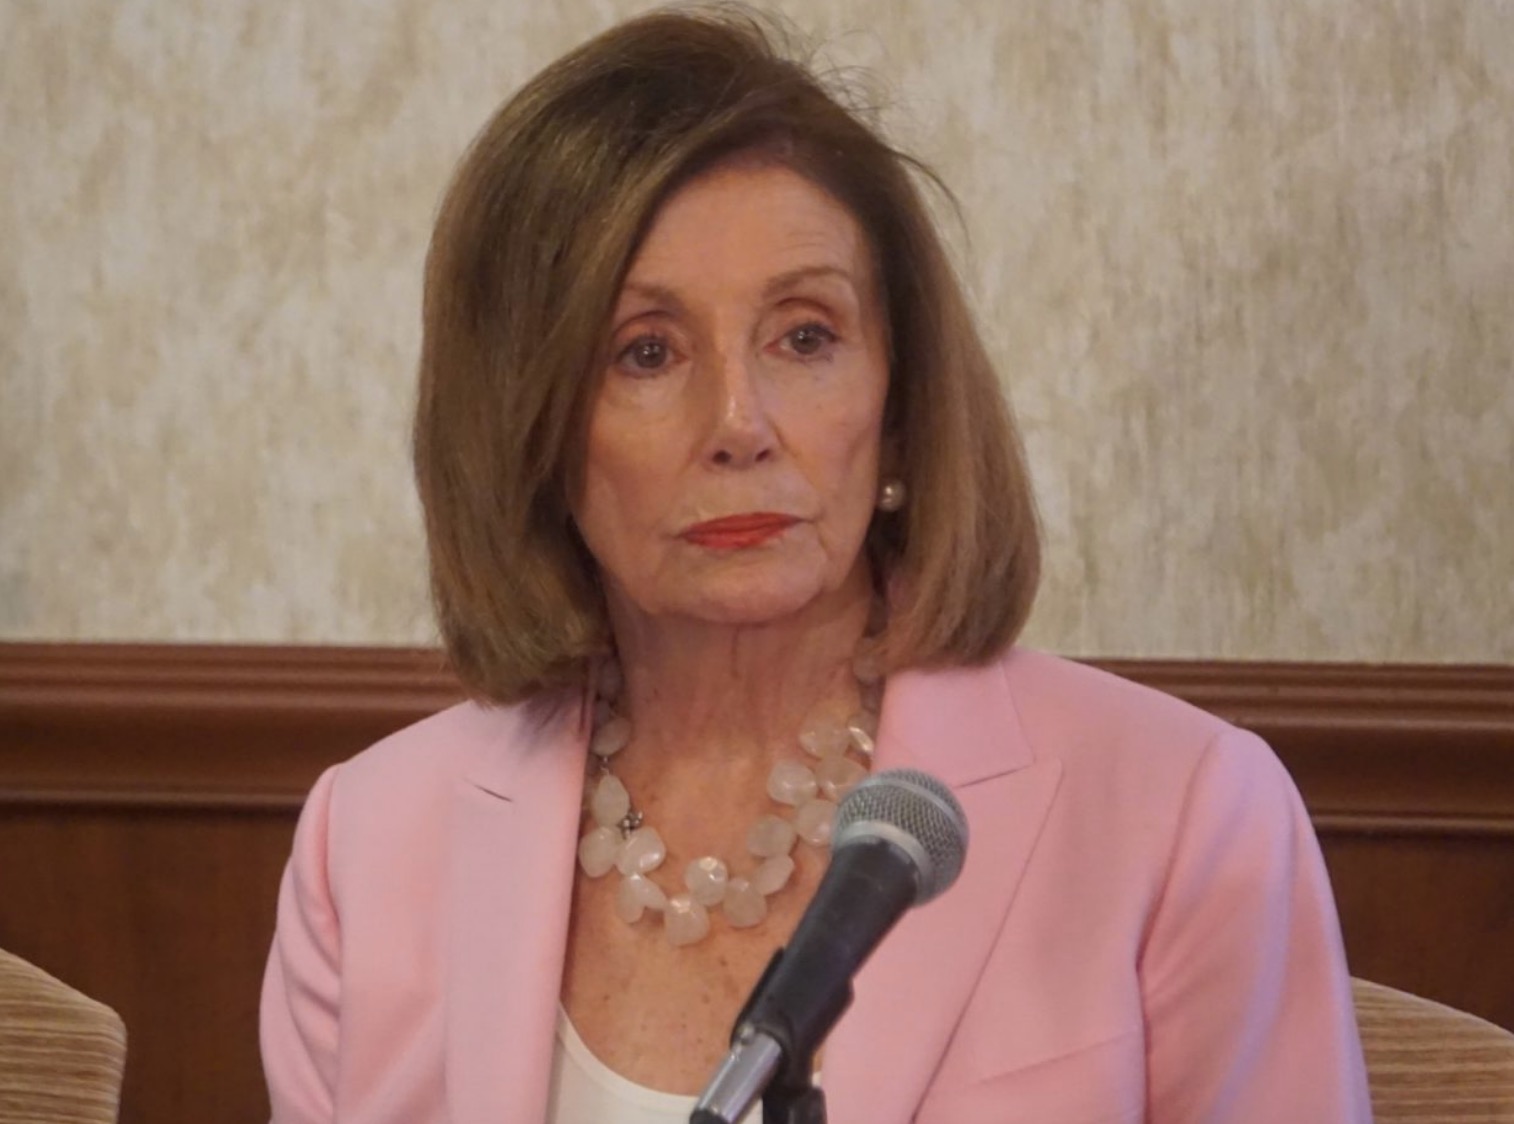 Republicans Question Pelosi's 'Right as Speaker' Election Overturning Remark